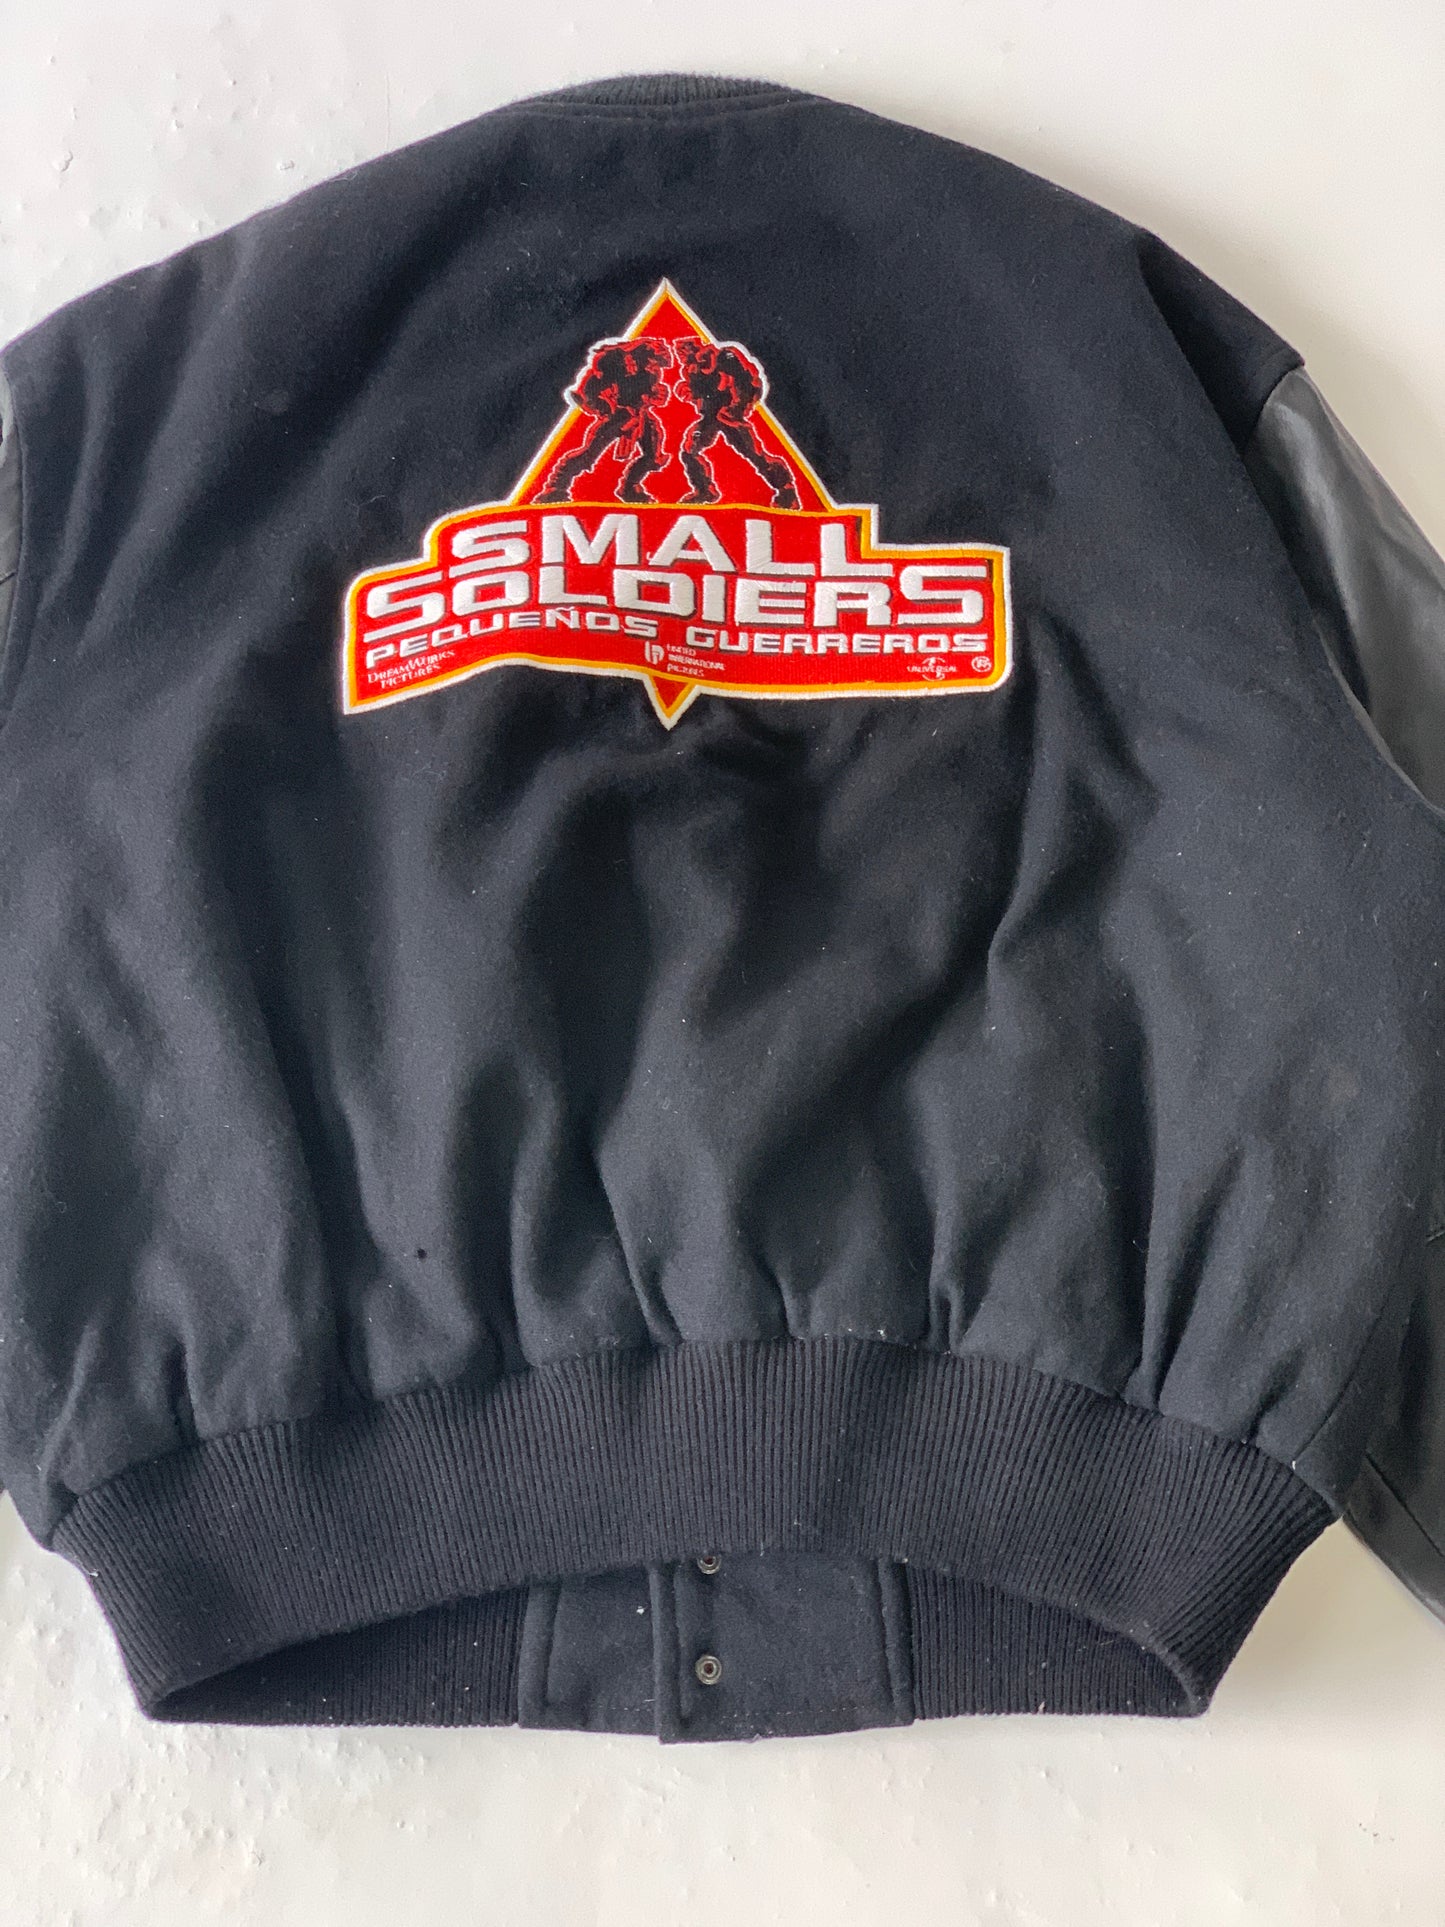 Small Soldiers Movie Promotional Vintage Bomber Leather Jacket - L